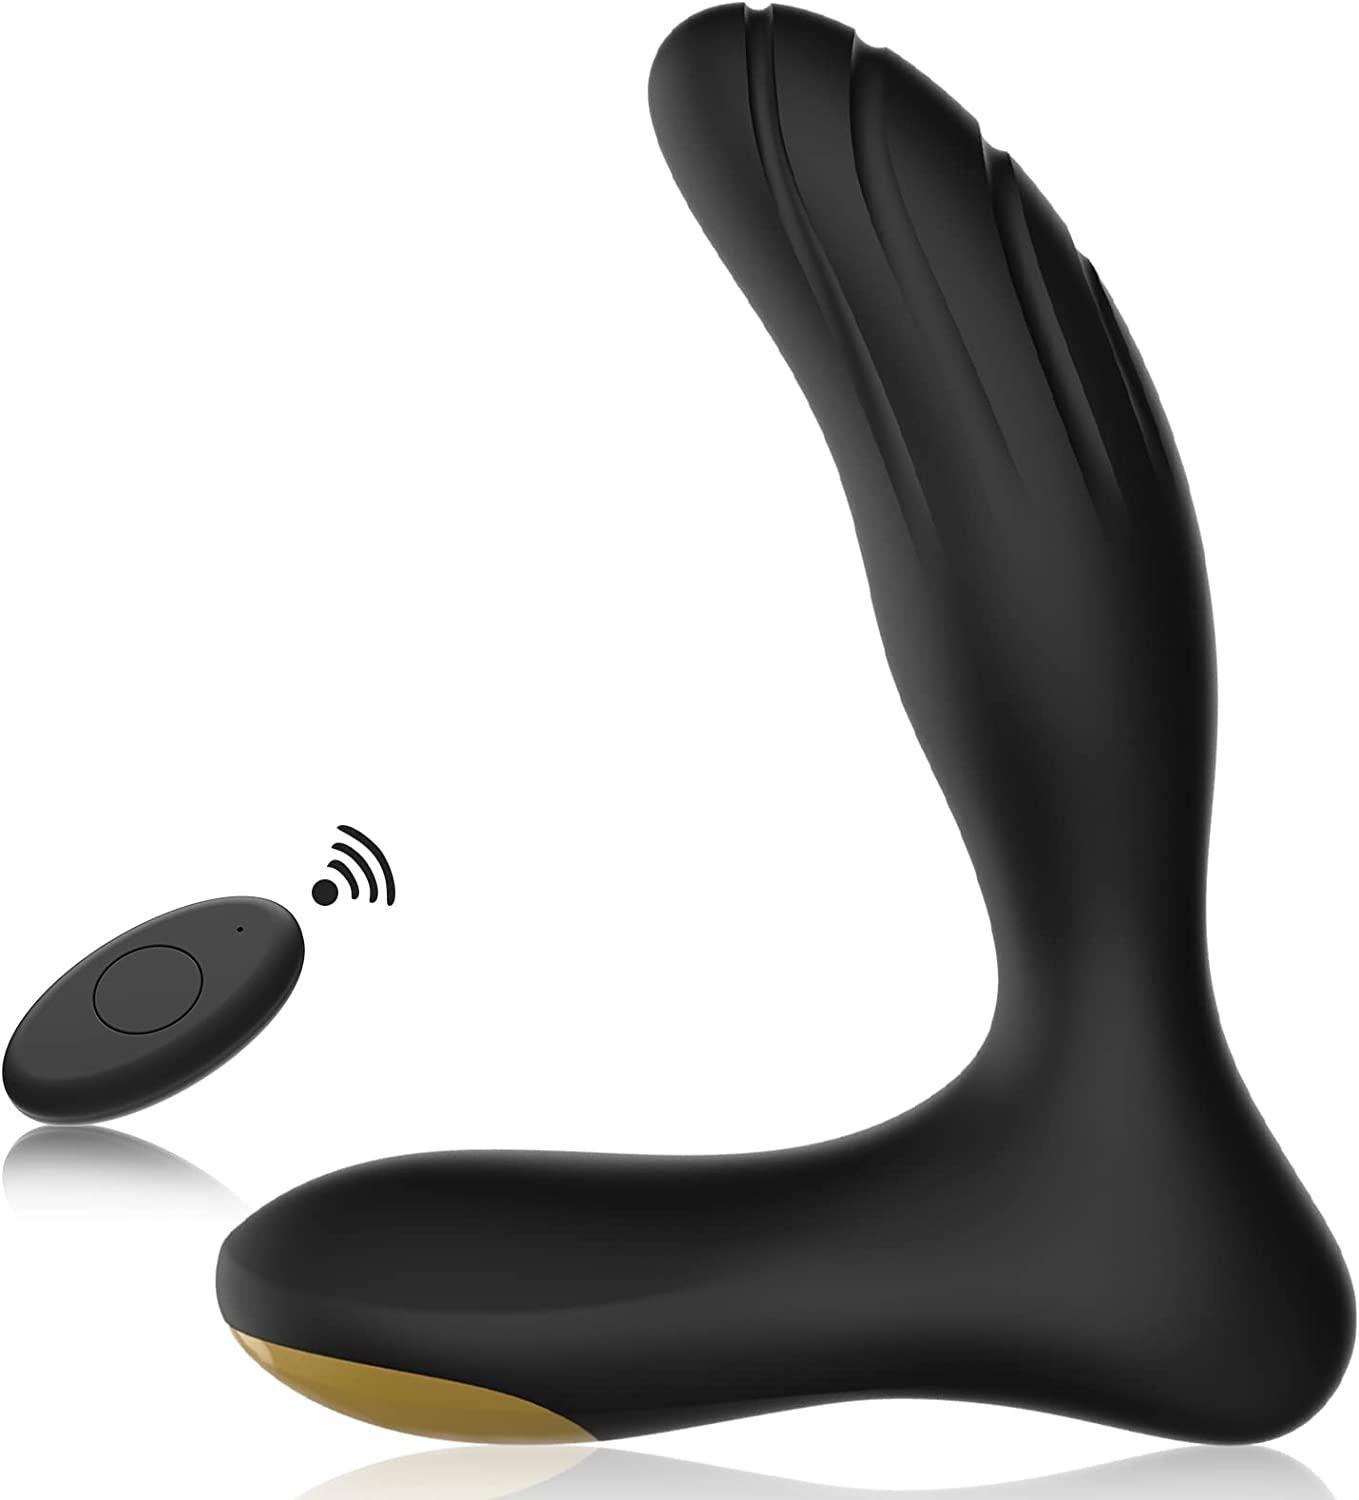 UNVOMI/PALOQUETH Waterproof Vibrating Prostate Massager for Beginners Personal wholesale Anal Toy P Spot Vibrator with Remote Control made in China